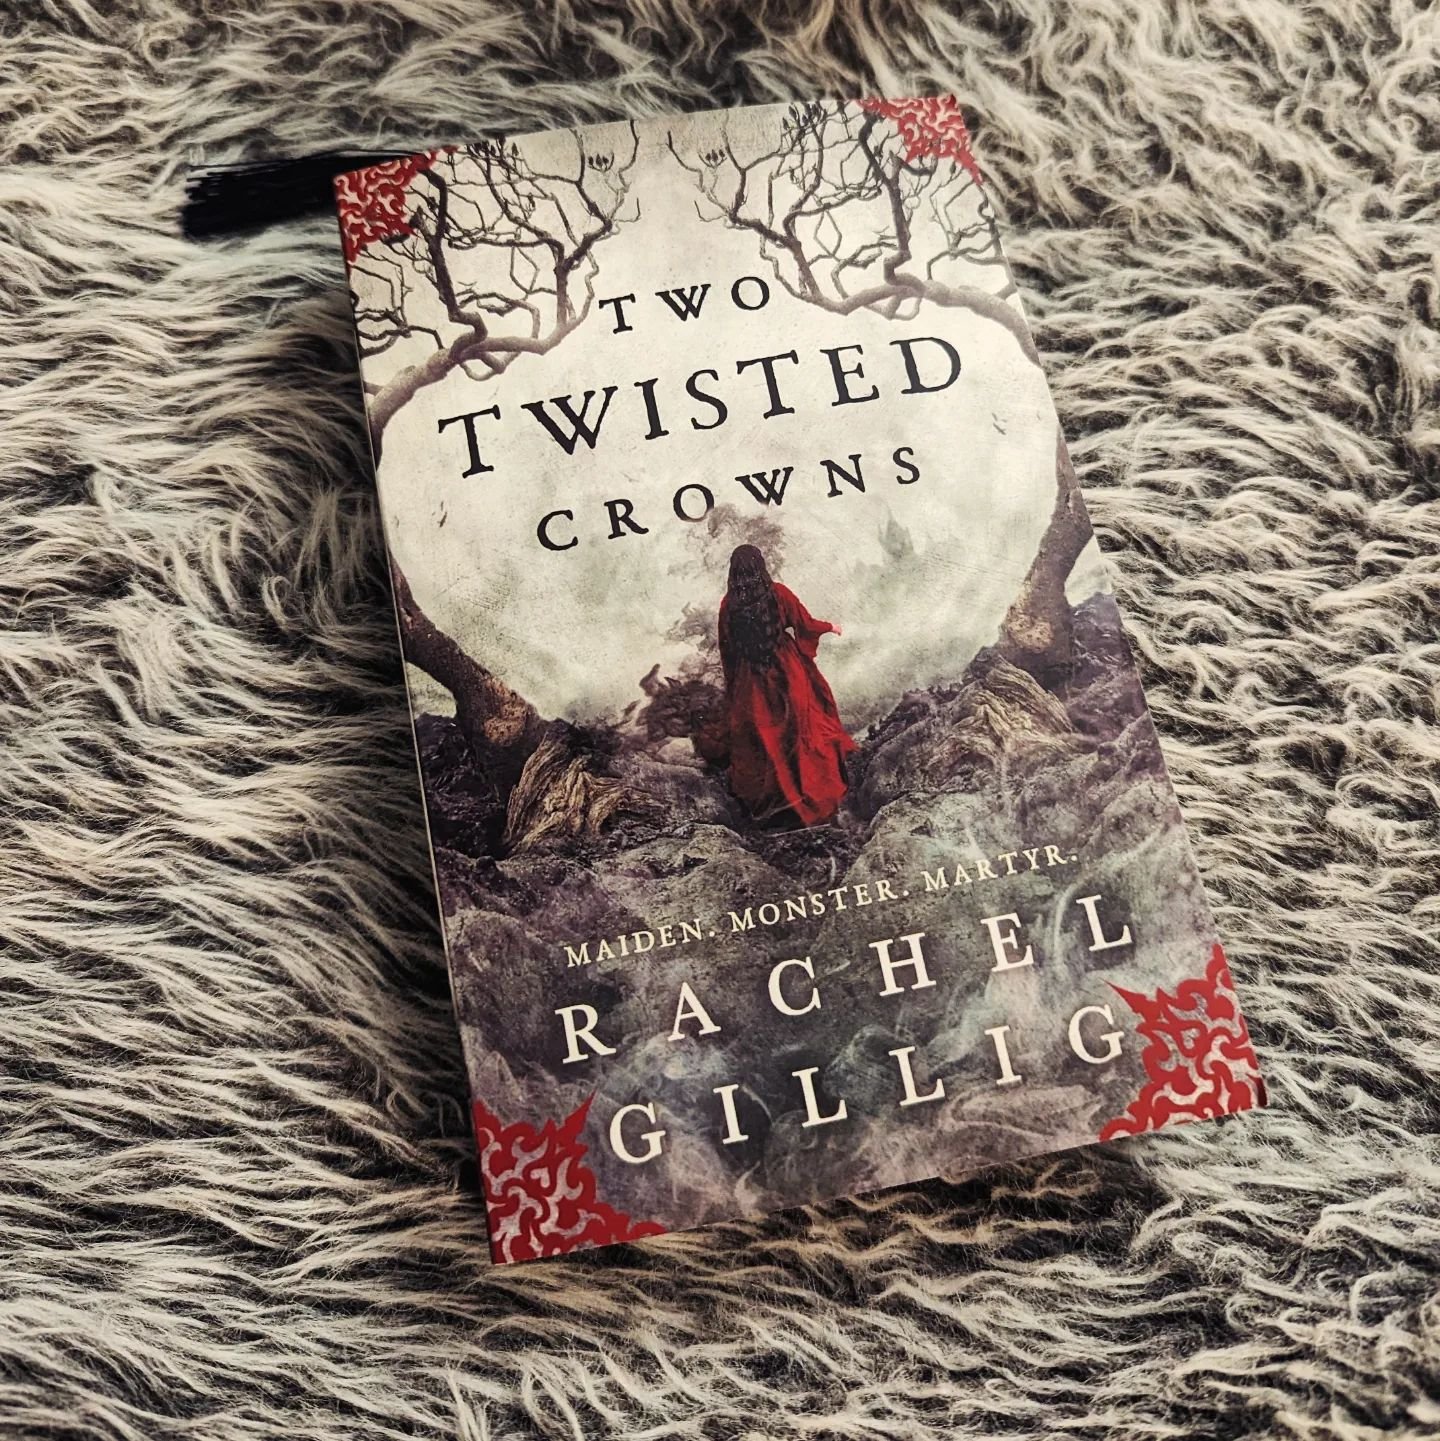 ✨📖 Current Read✨📖
Two Twisted Crowns by Rachel Gilleg 

I loved the first book and am super excited to get into this one! 

 #fantasyreads #fantasy #fantasyfiction #fantasybooks #amreadingfantasy #bookblogger #booklover #bookpost #readingismagic #r